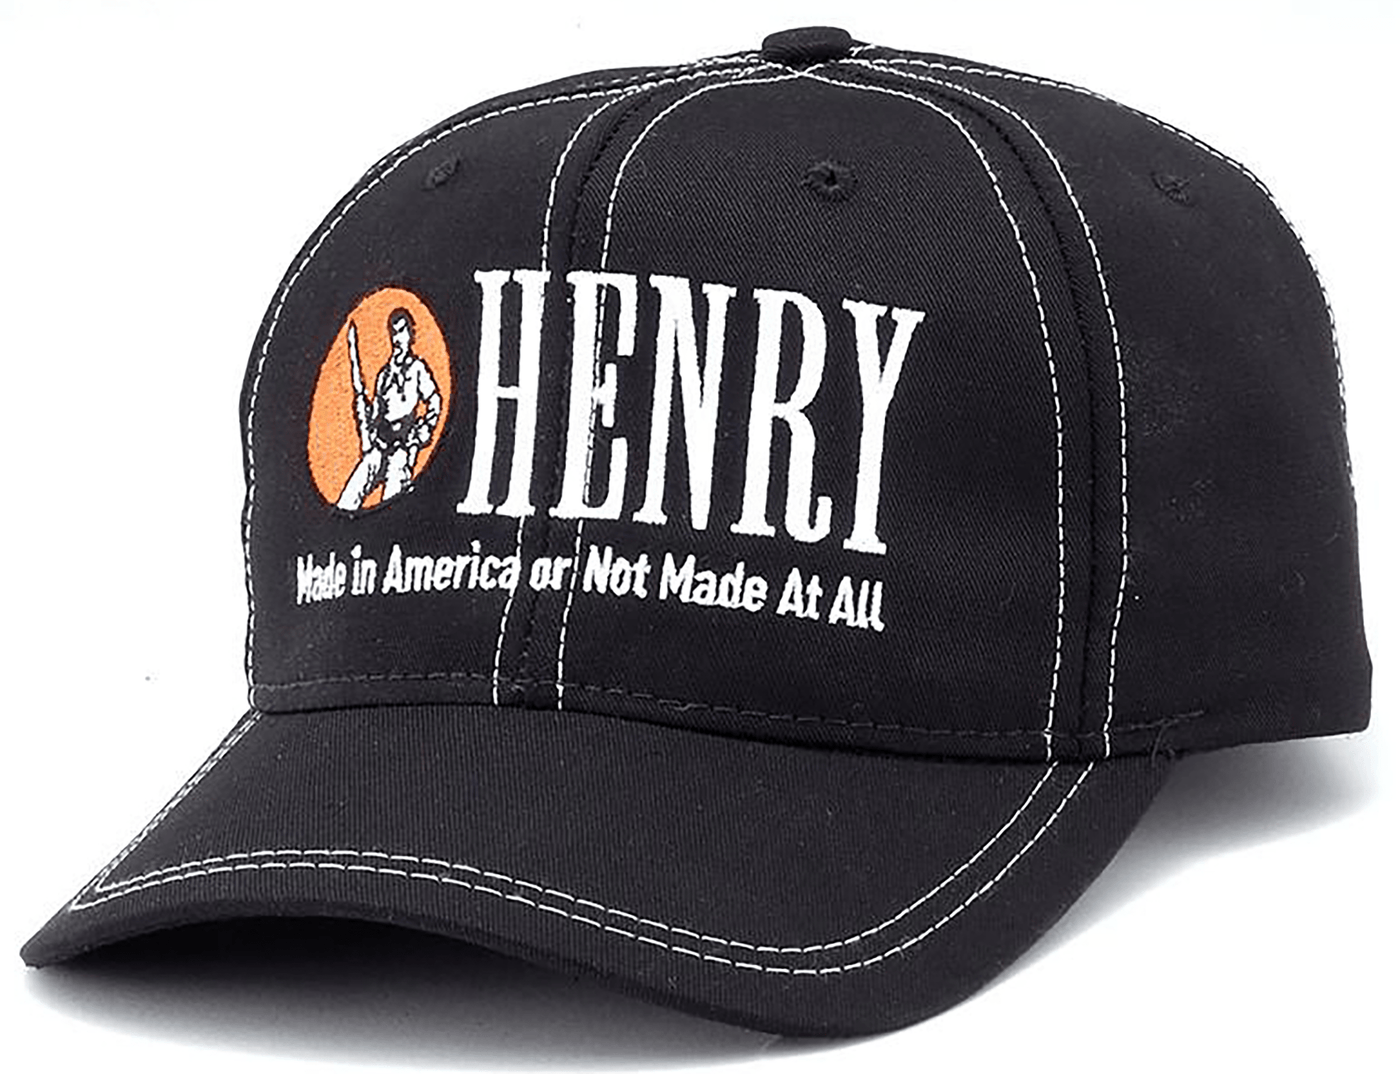 Henry Henry Made In America, Henry Hc007      Made In America Cap Accessories